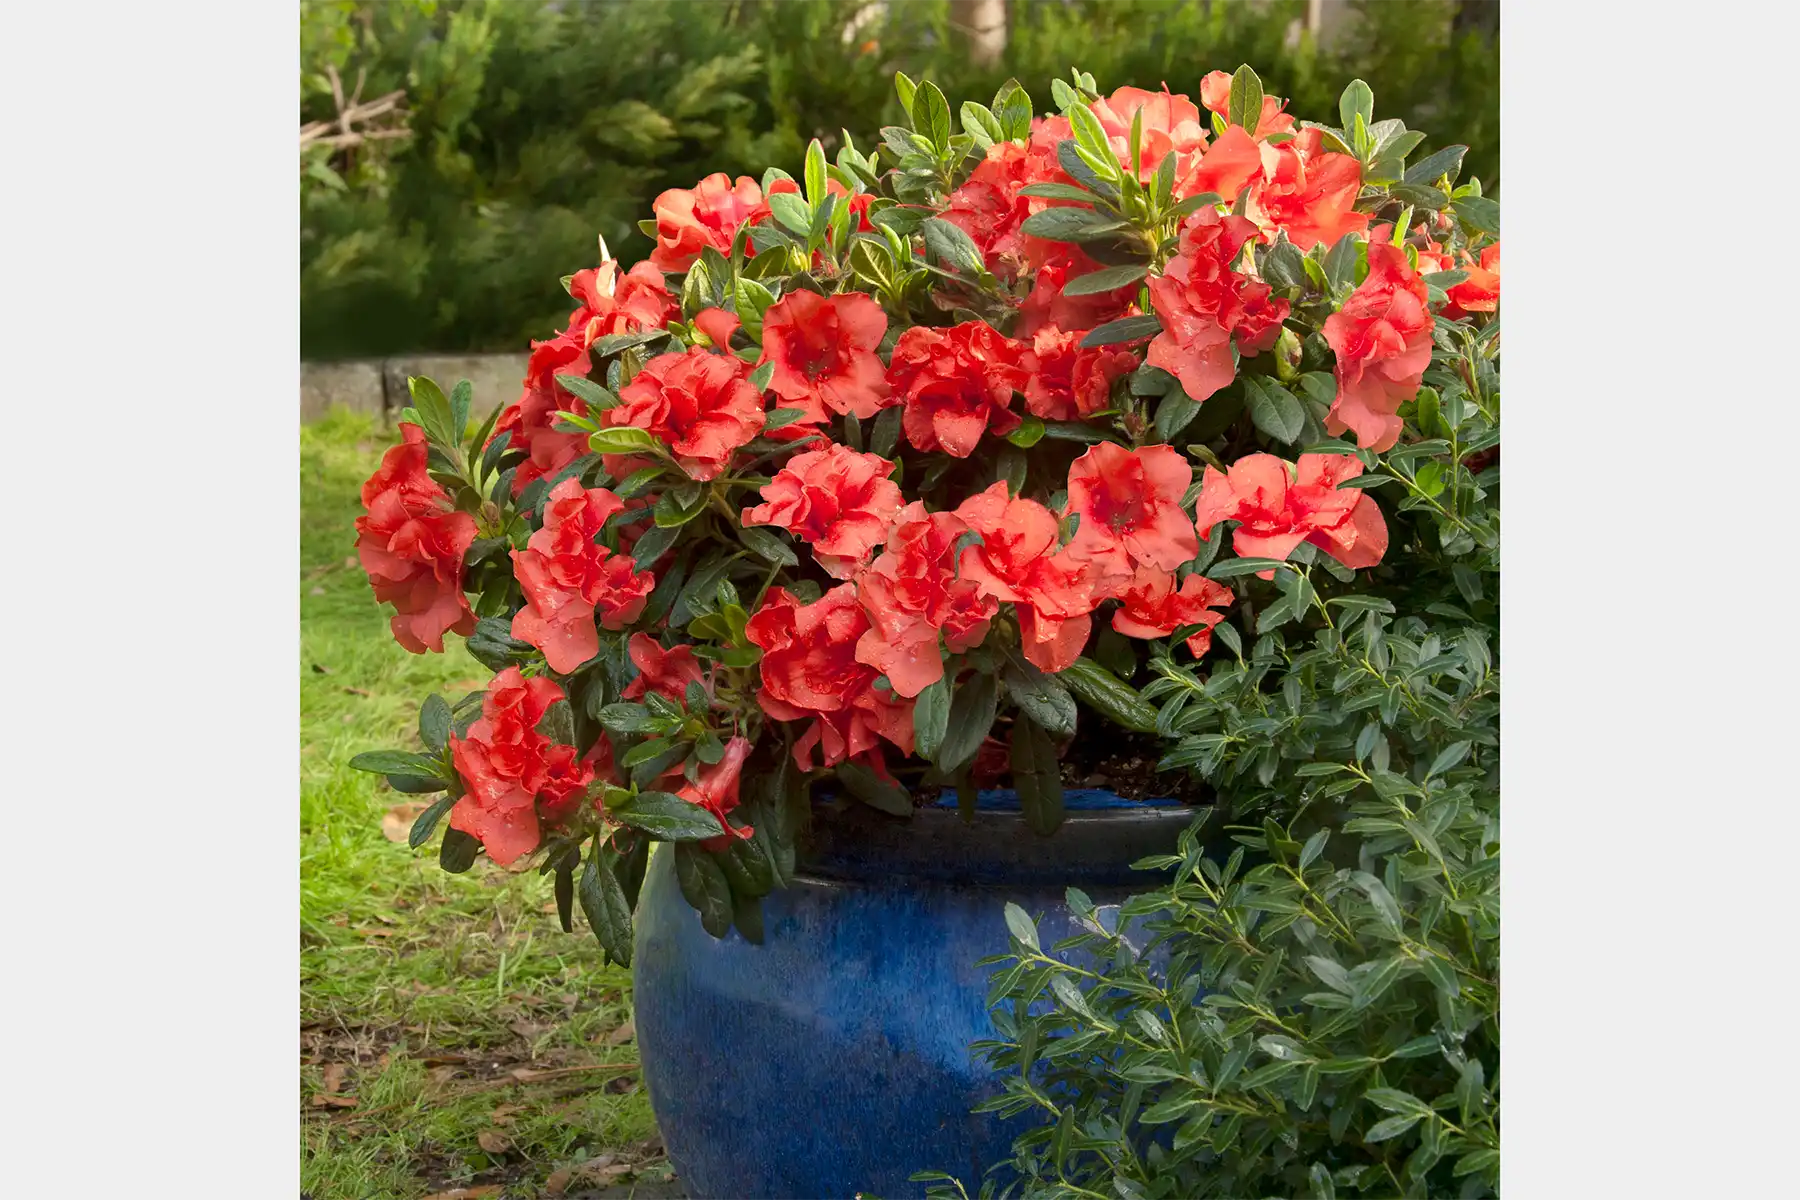 Large glowing red-orange Autumn Embers® azalea blooms in a decorative blue ceramic pot, surrounded by rich green foliage in an outdoor setting.